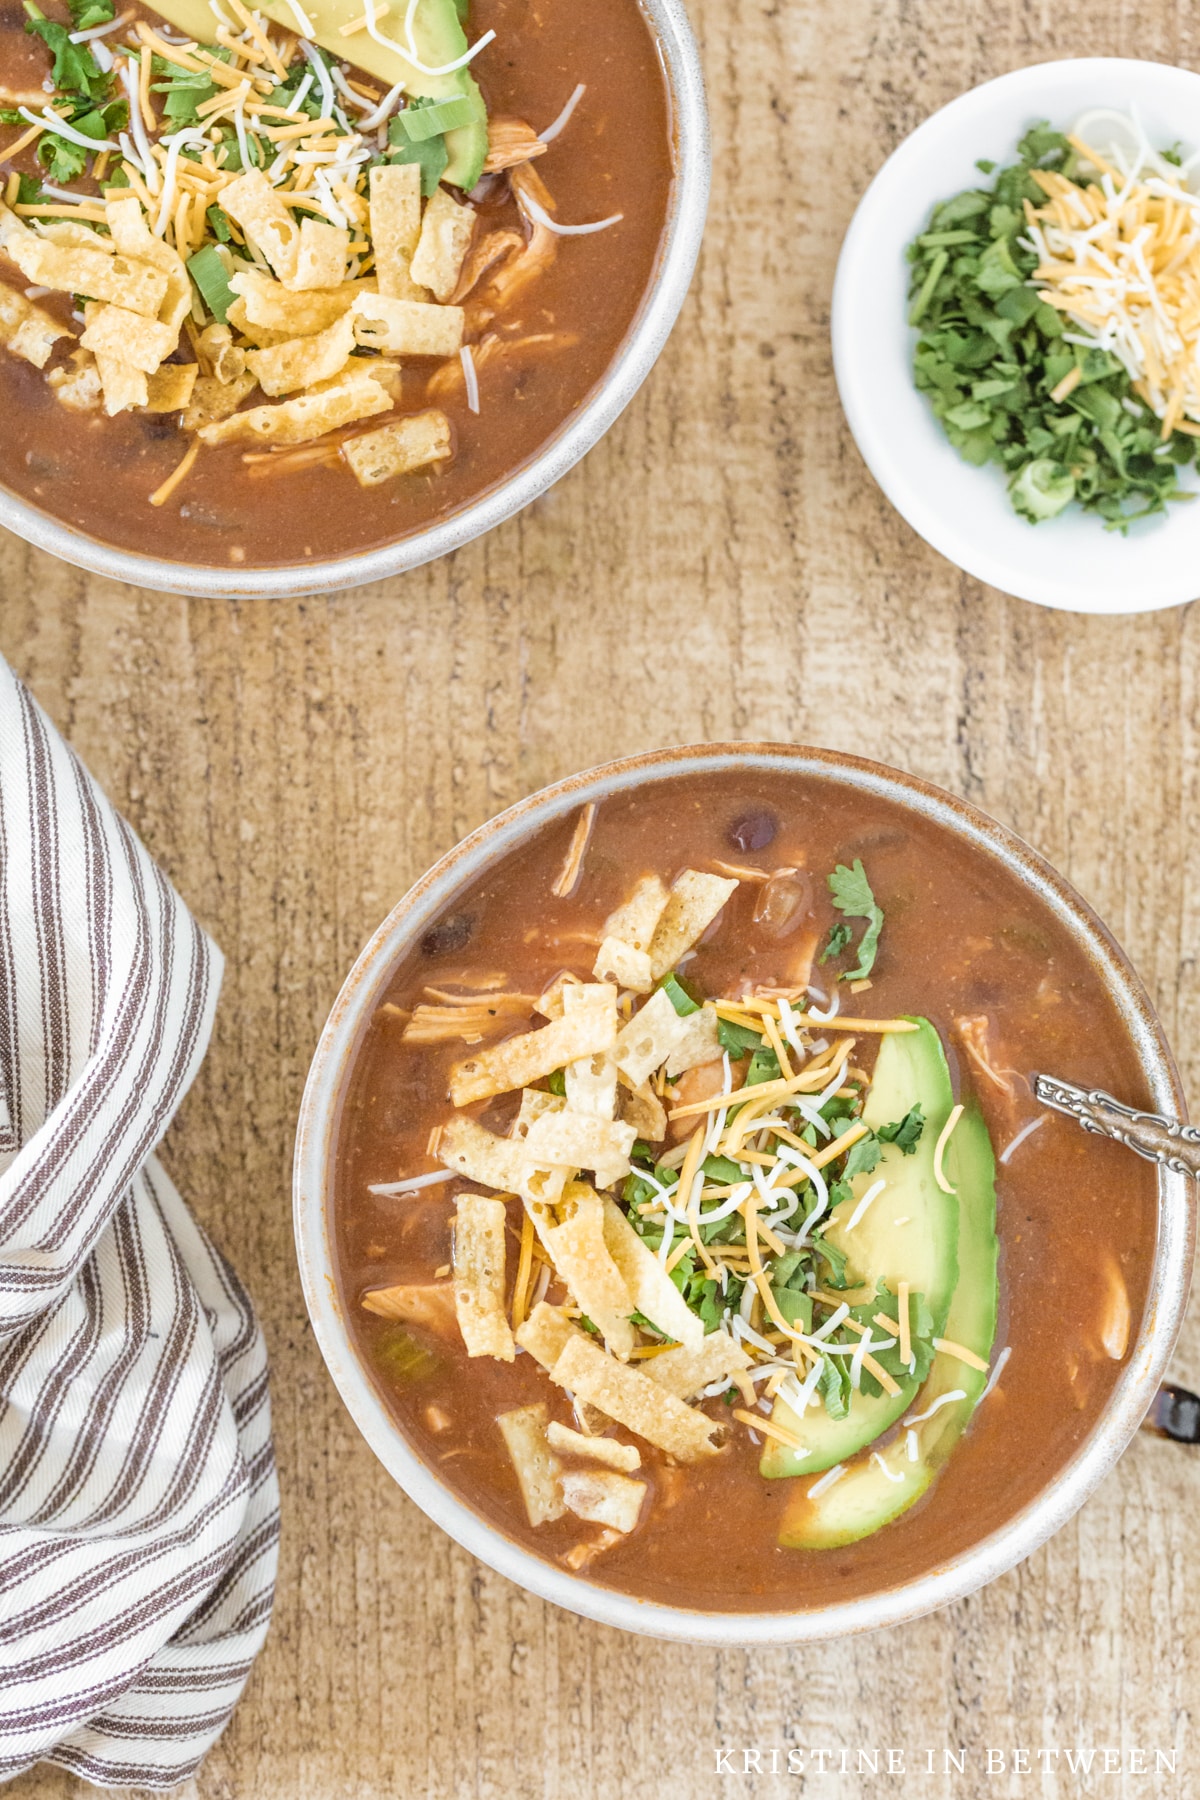 Two bowls of enchilada soup topped with cheese, tortilla strips, and avocado sitting with a striped napkin.